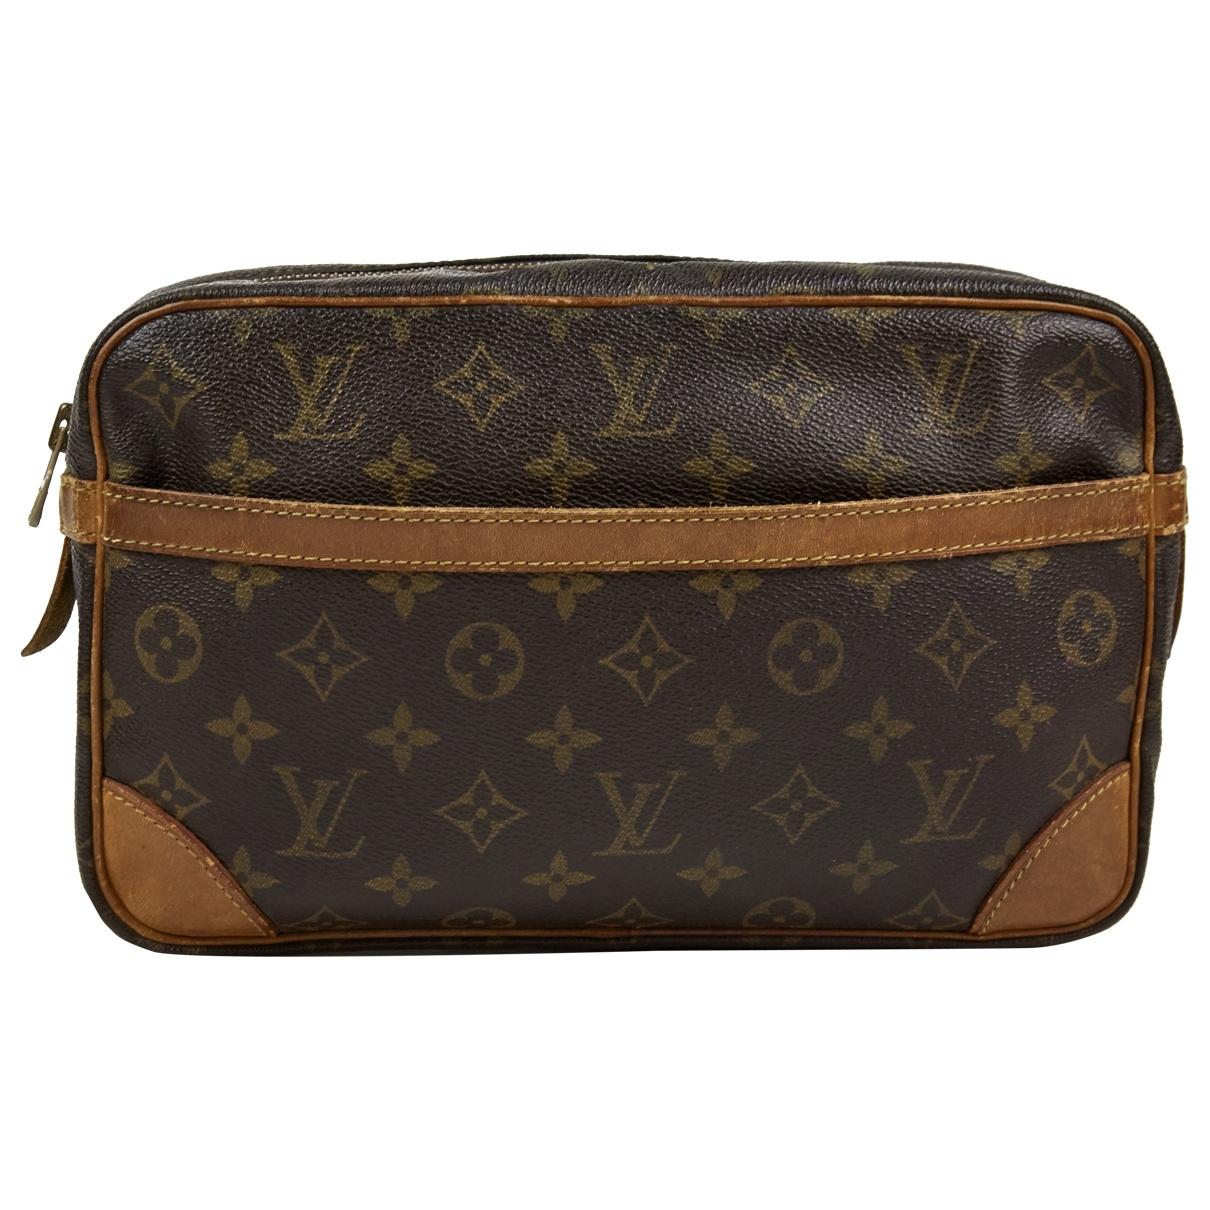 Lyst - Louis Vuitton Vintage Brown Cloth Small Bag, Wallets & Cases in Brown for Men